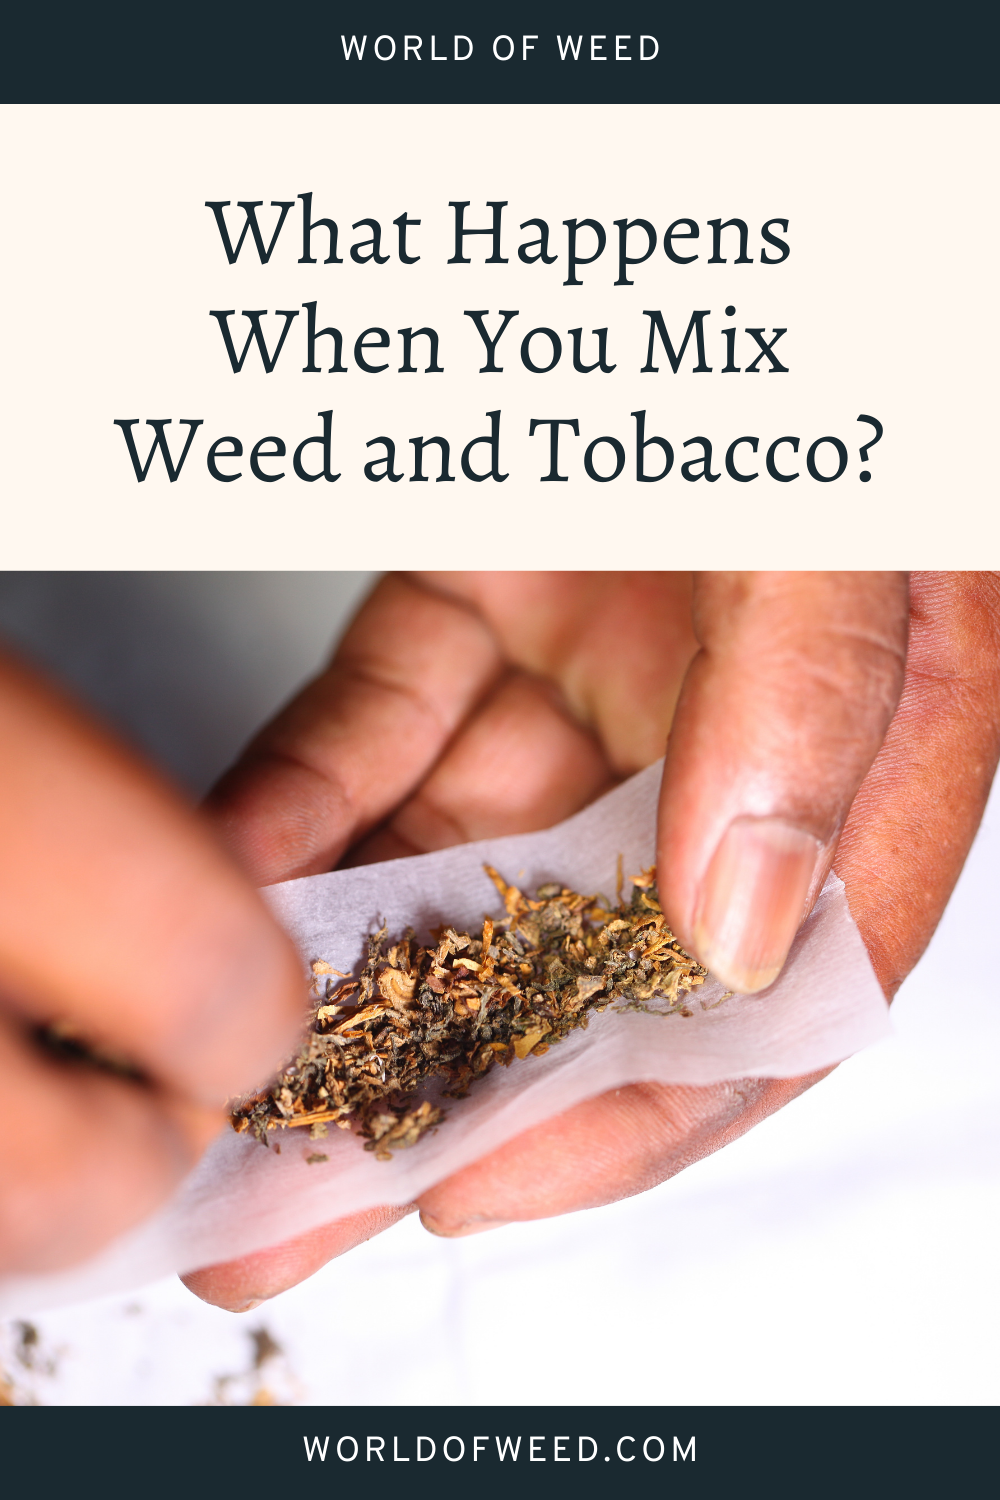 What Happens When You Mix Weed and Tobacco?